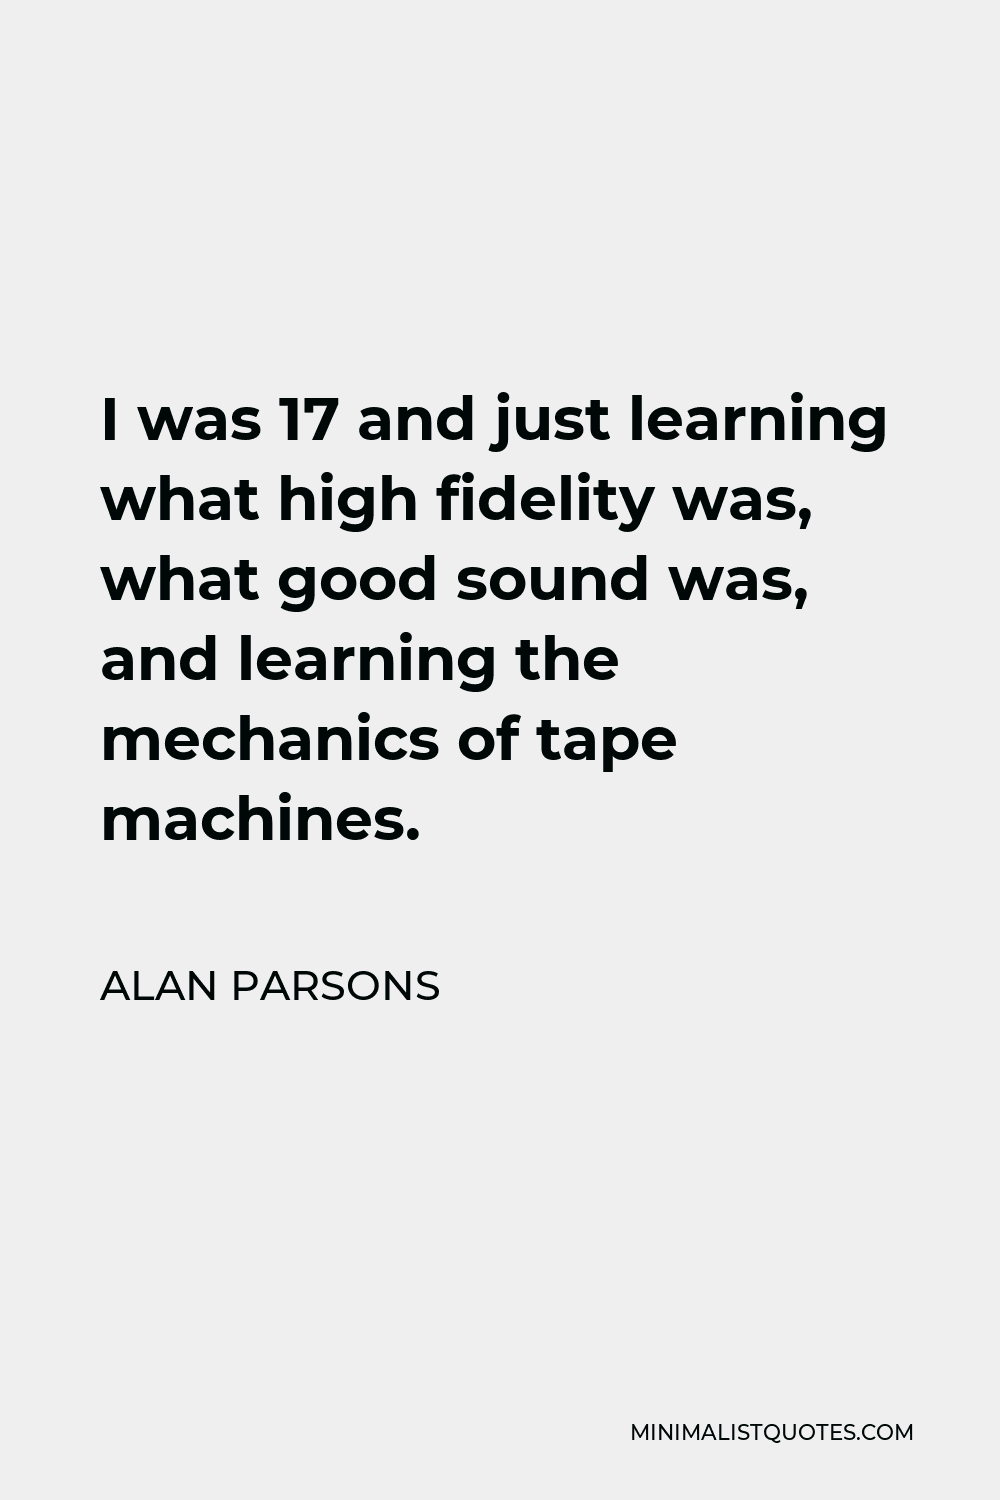 Alan Parsons Quote - I was 17 and just learning what high fidelity was, what good sound was, and learning the mechanics of tape machines.